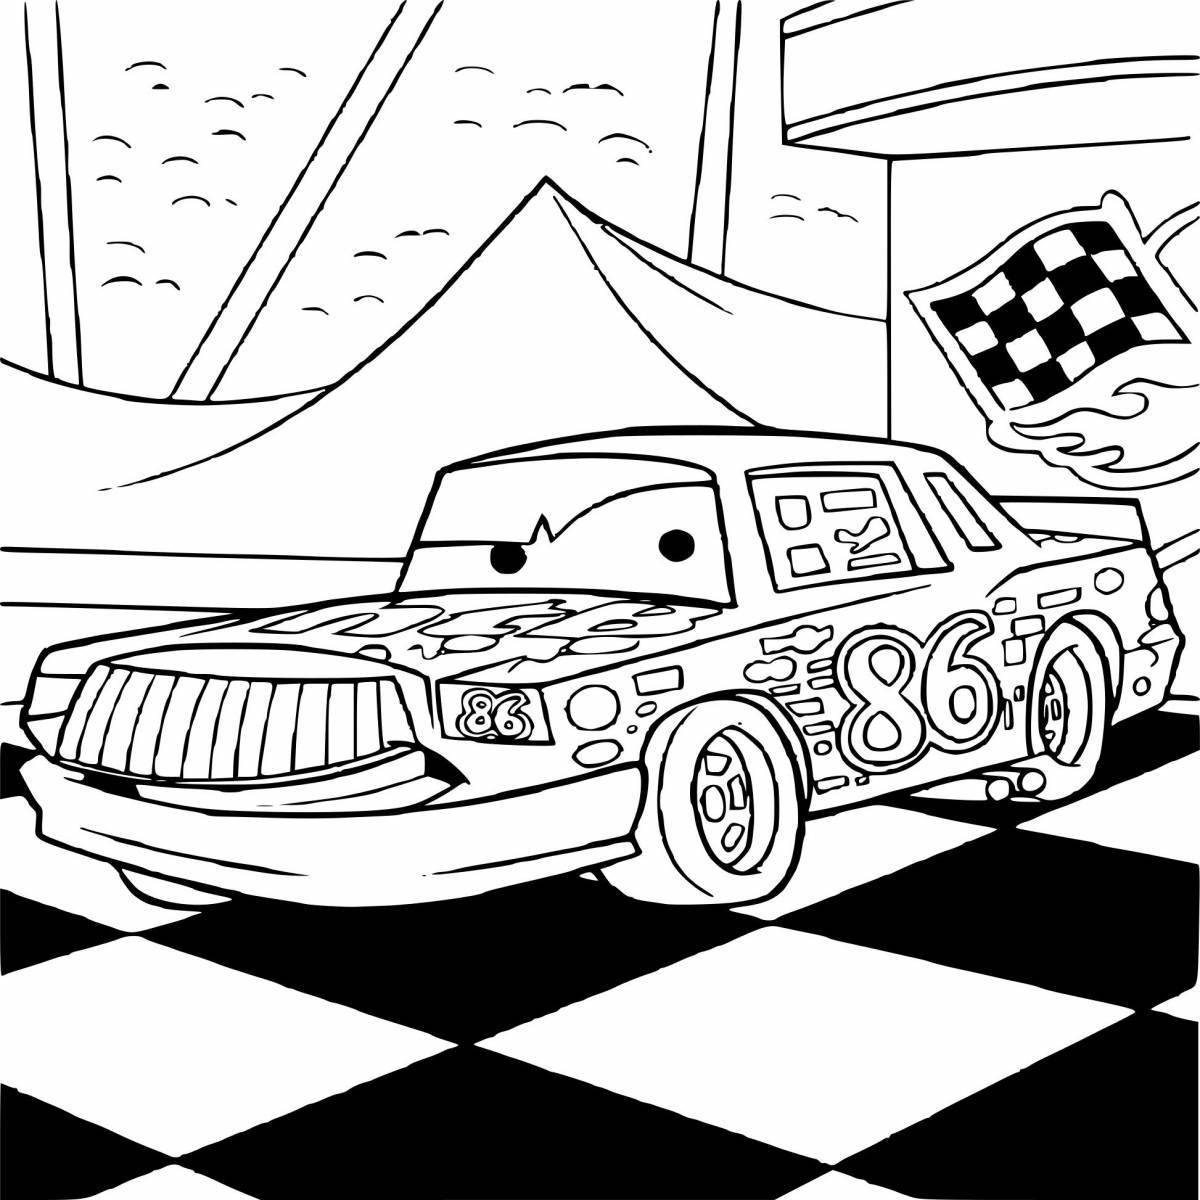 Colorful chico coloring page